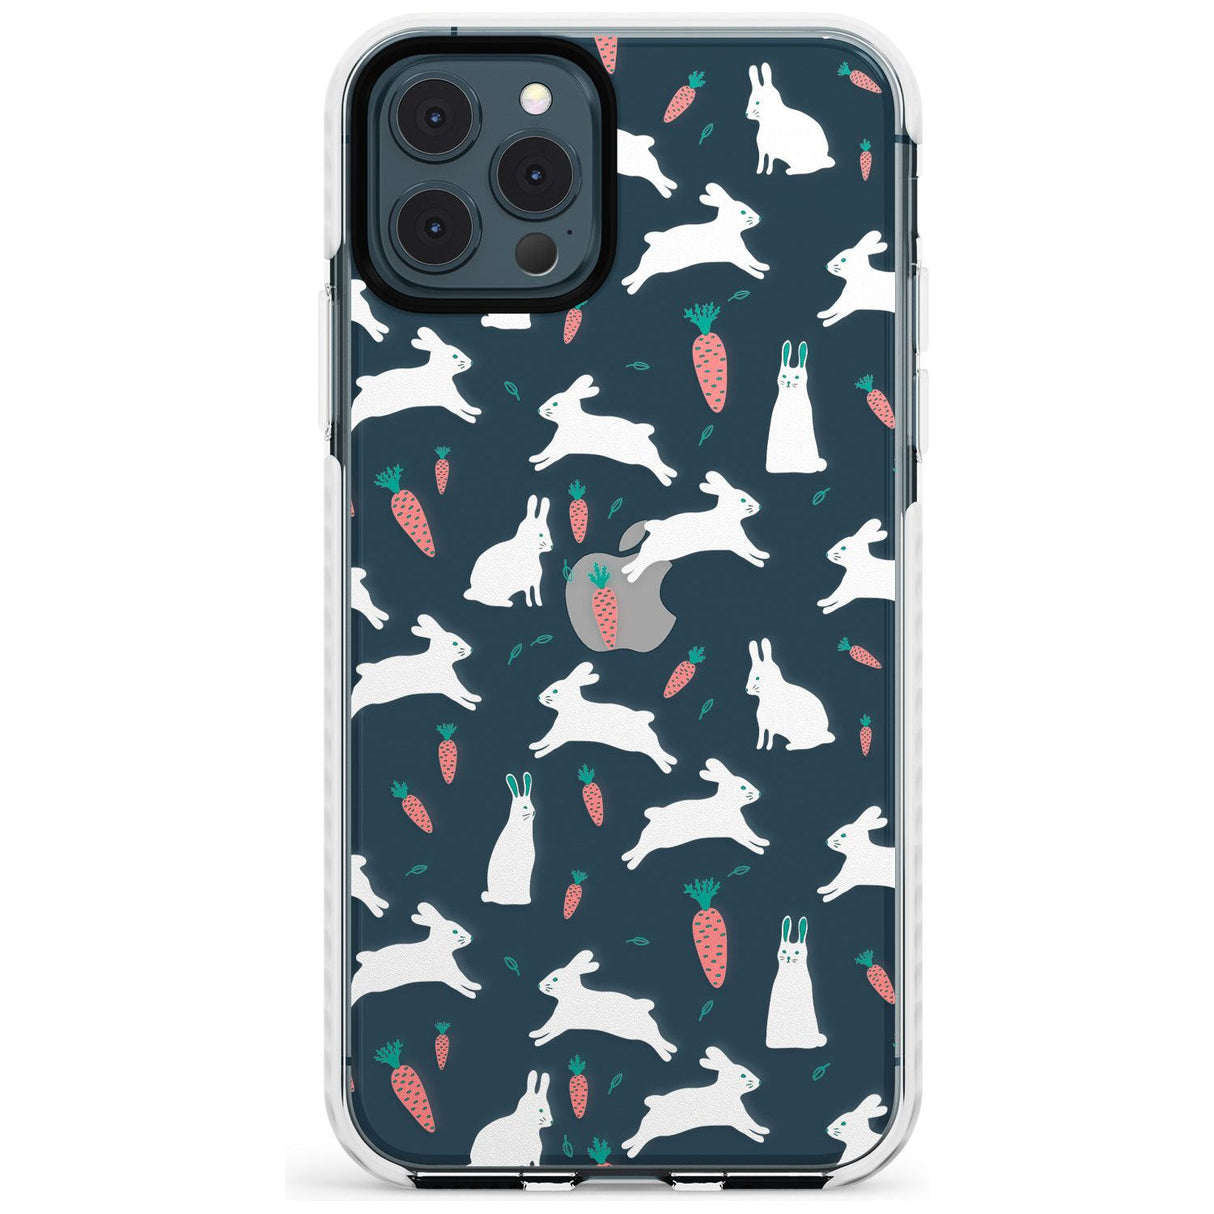 White Bunnies and Carrots Impact Phone Case for iPhone 11 Pro Max